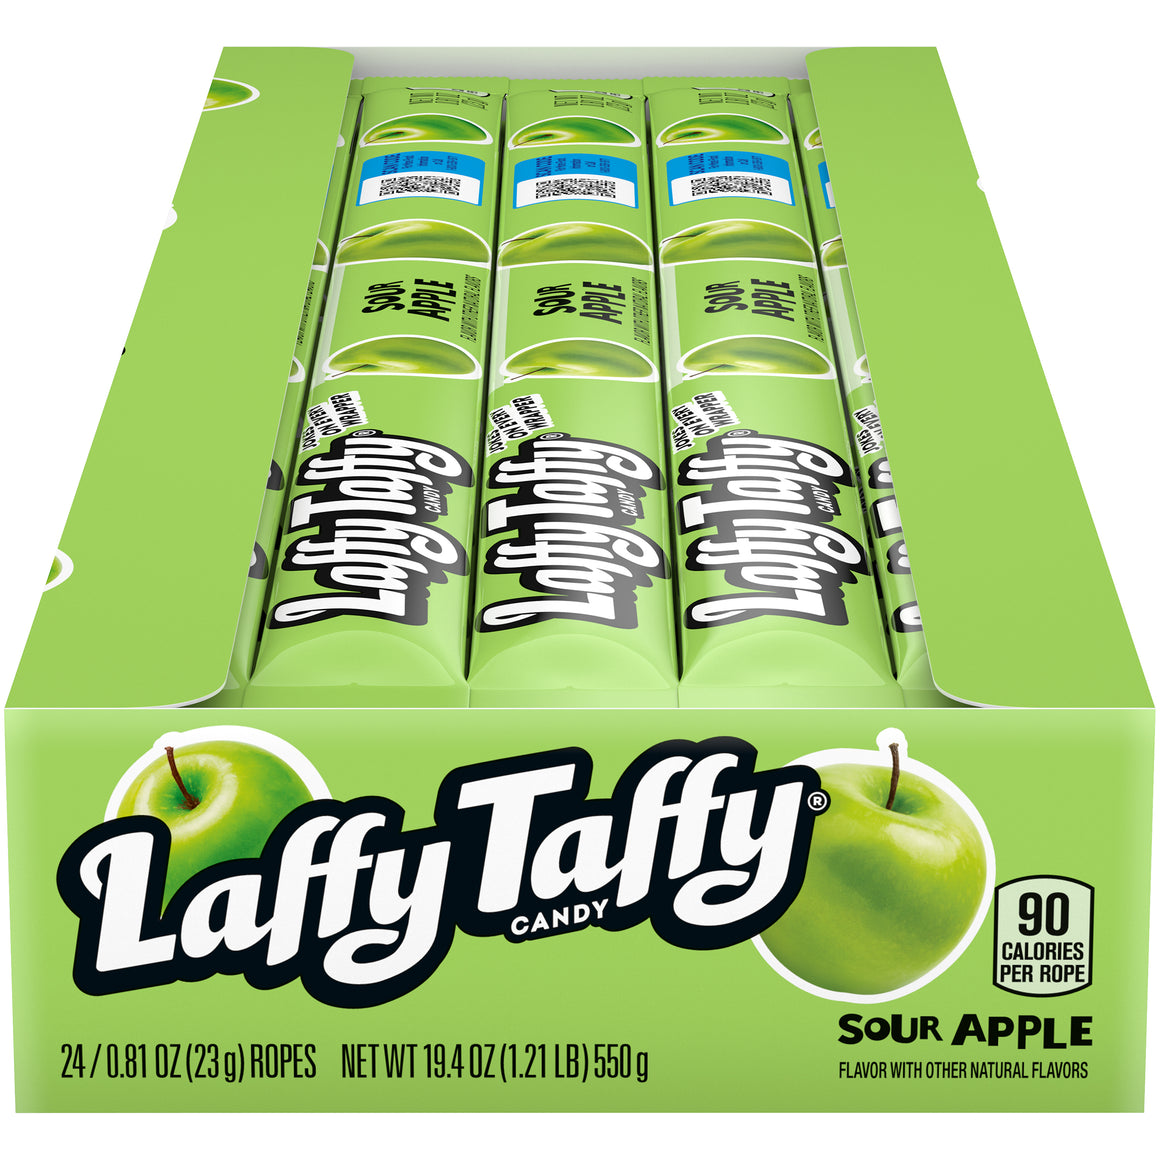 All City Candy Laffy Taffy Sour Apple Rope .81-oz. - 1 Piece Taffy Ferrara Candy Company For fresh candy and great service, visit www.allcitycandy.com